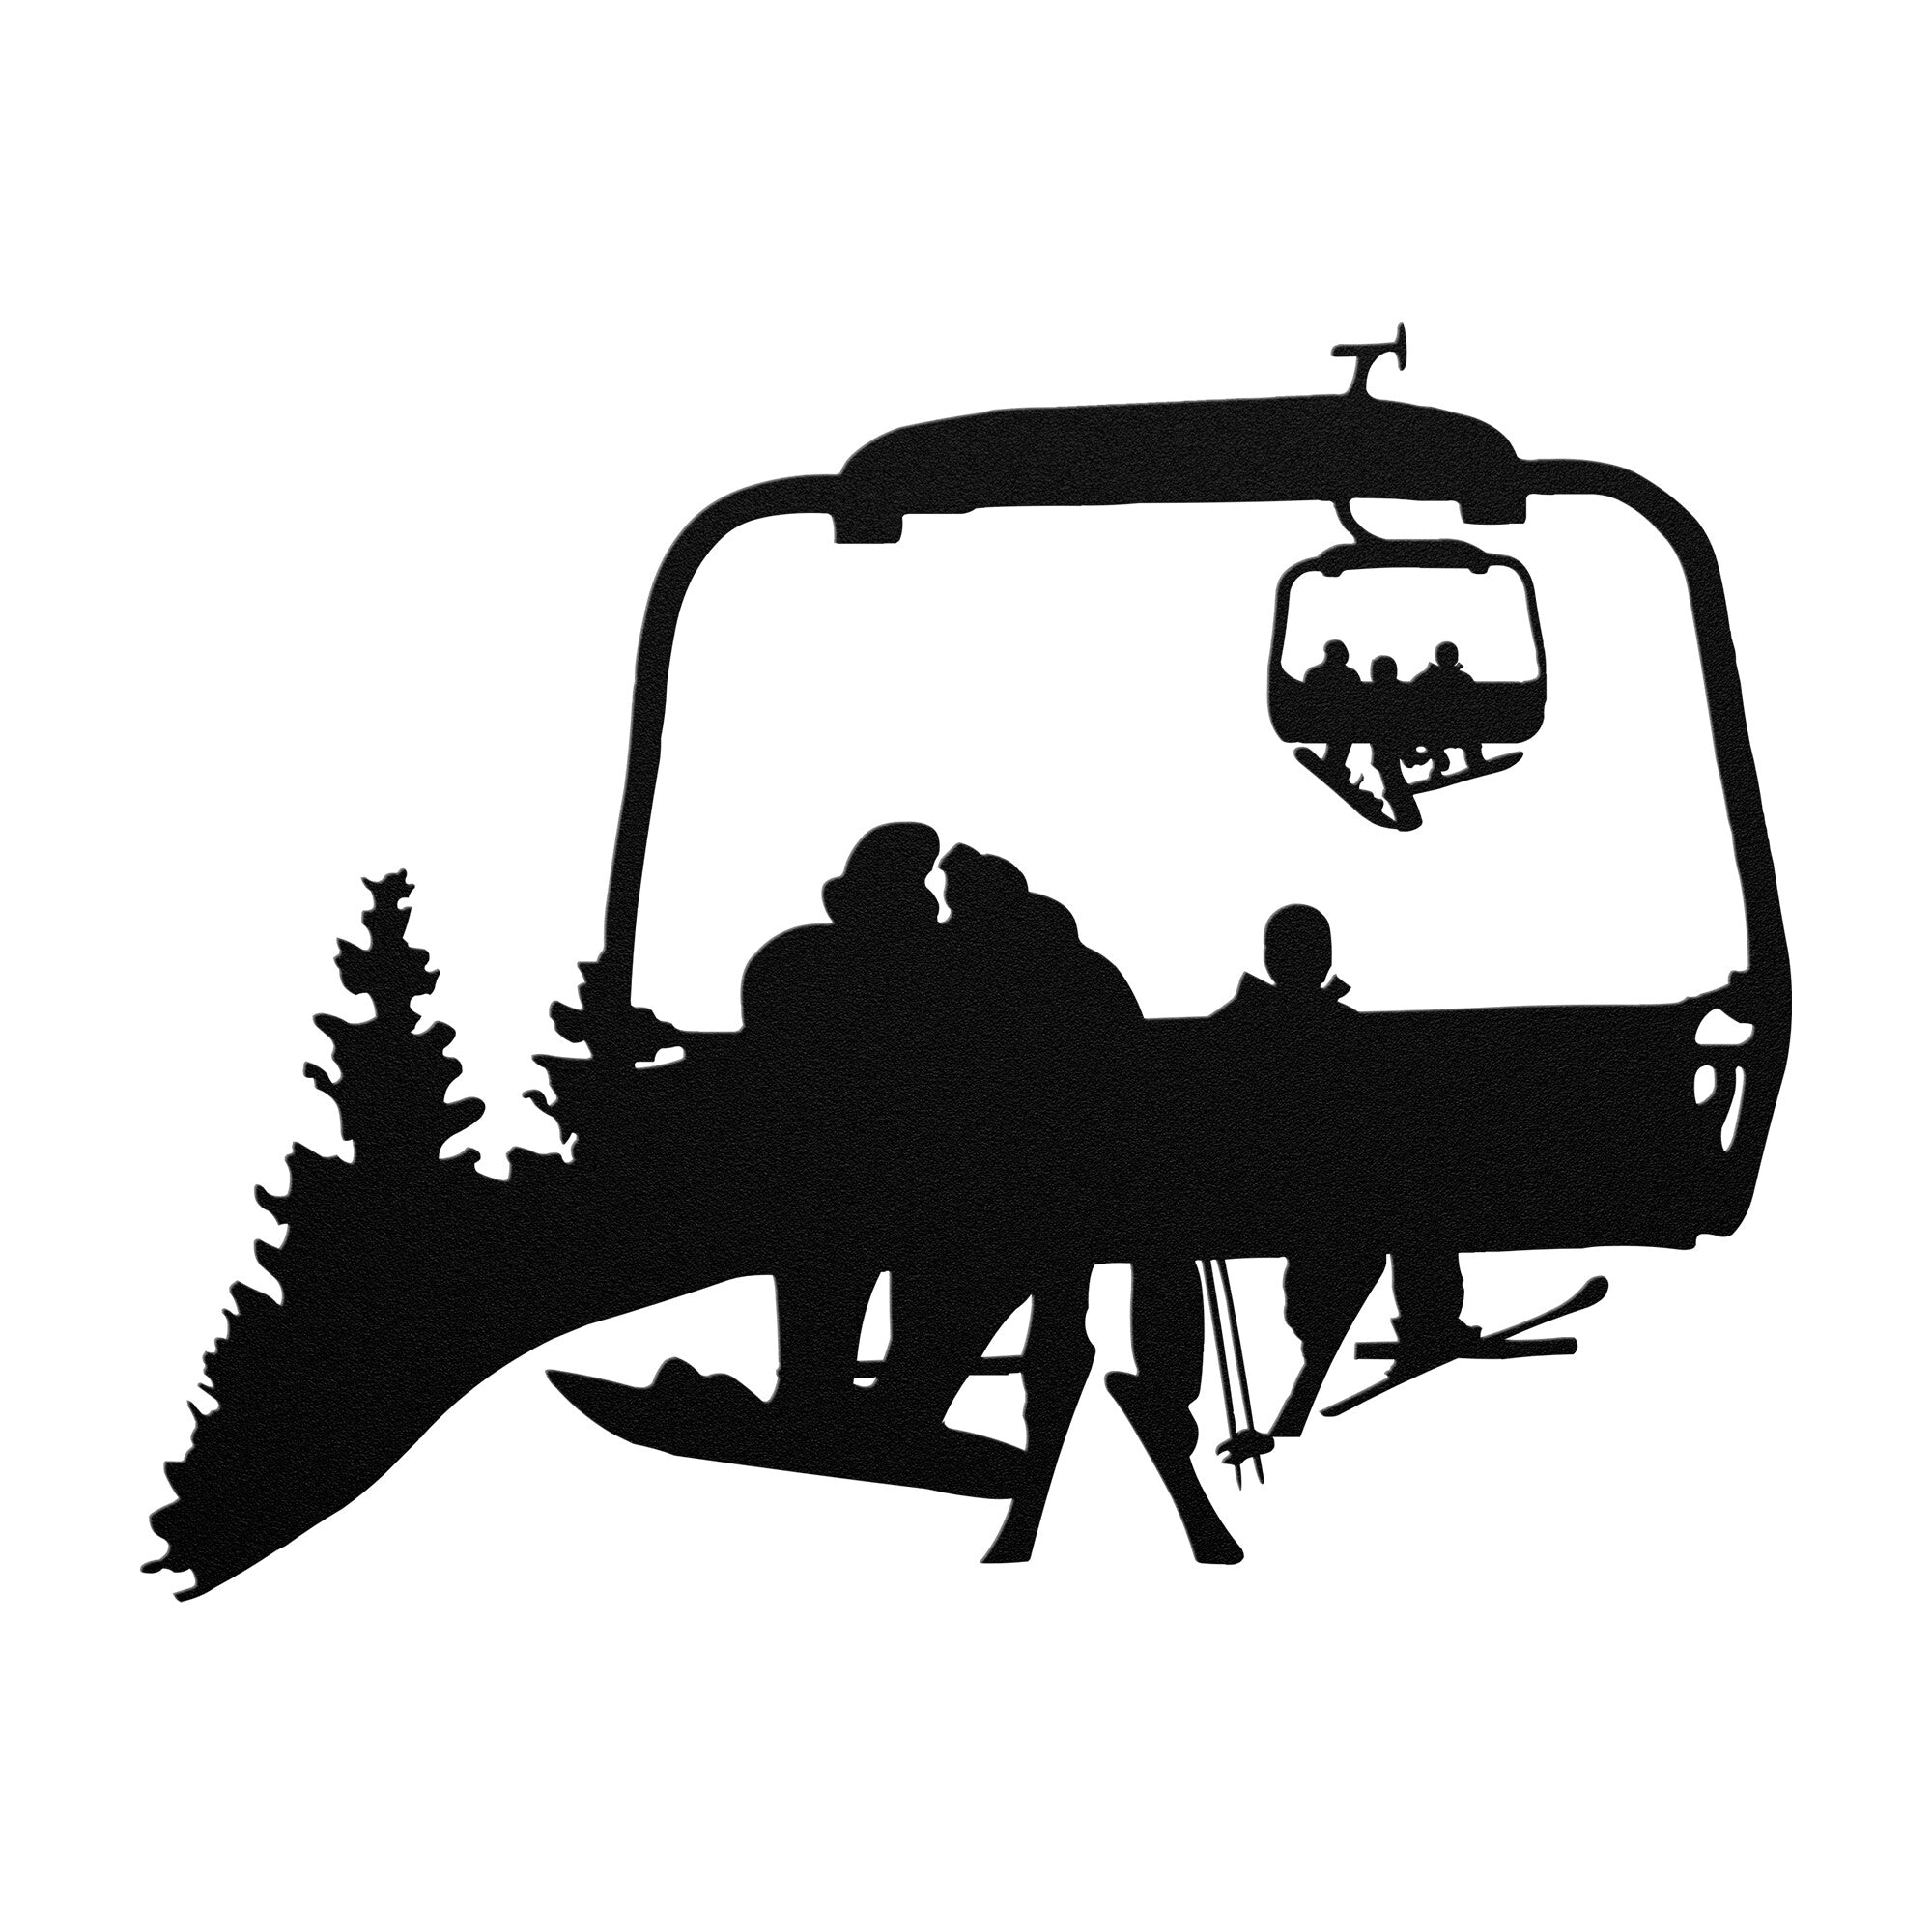 PERSONALIZED CHAIRLIFT SKI & SNOWBOARD FAMILY METAL WALL ART, 1 SNOWBOARDING DAD, 1 SKIING MOM, 1 SKIING CHILD  (🇺🇸 MADE IN THE USA)